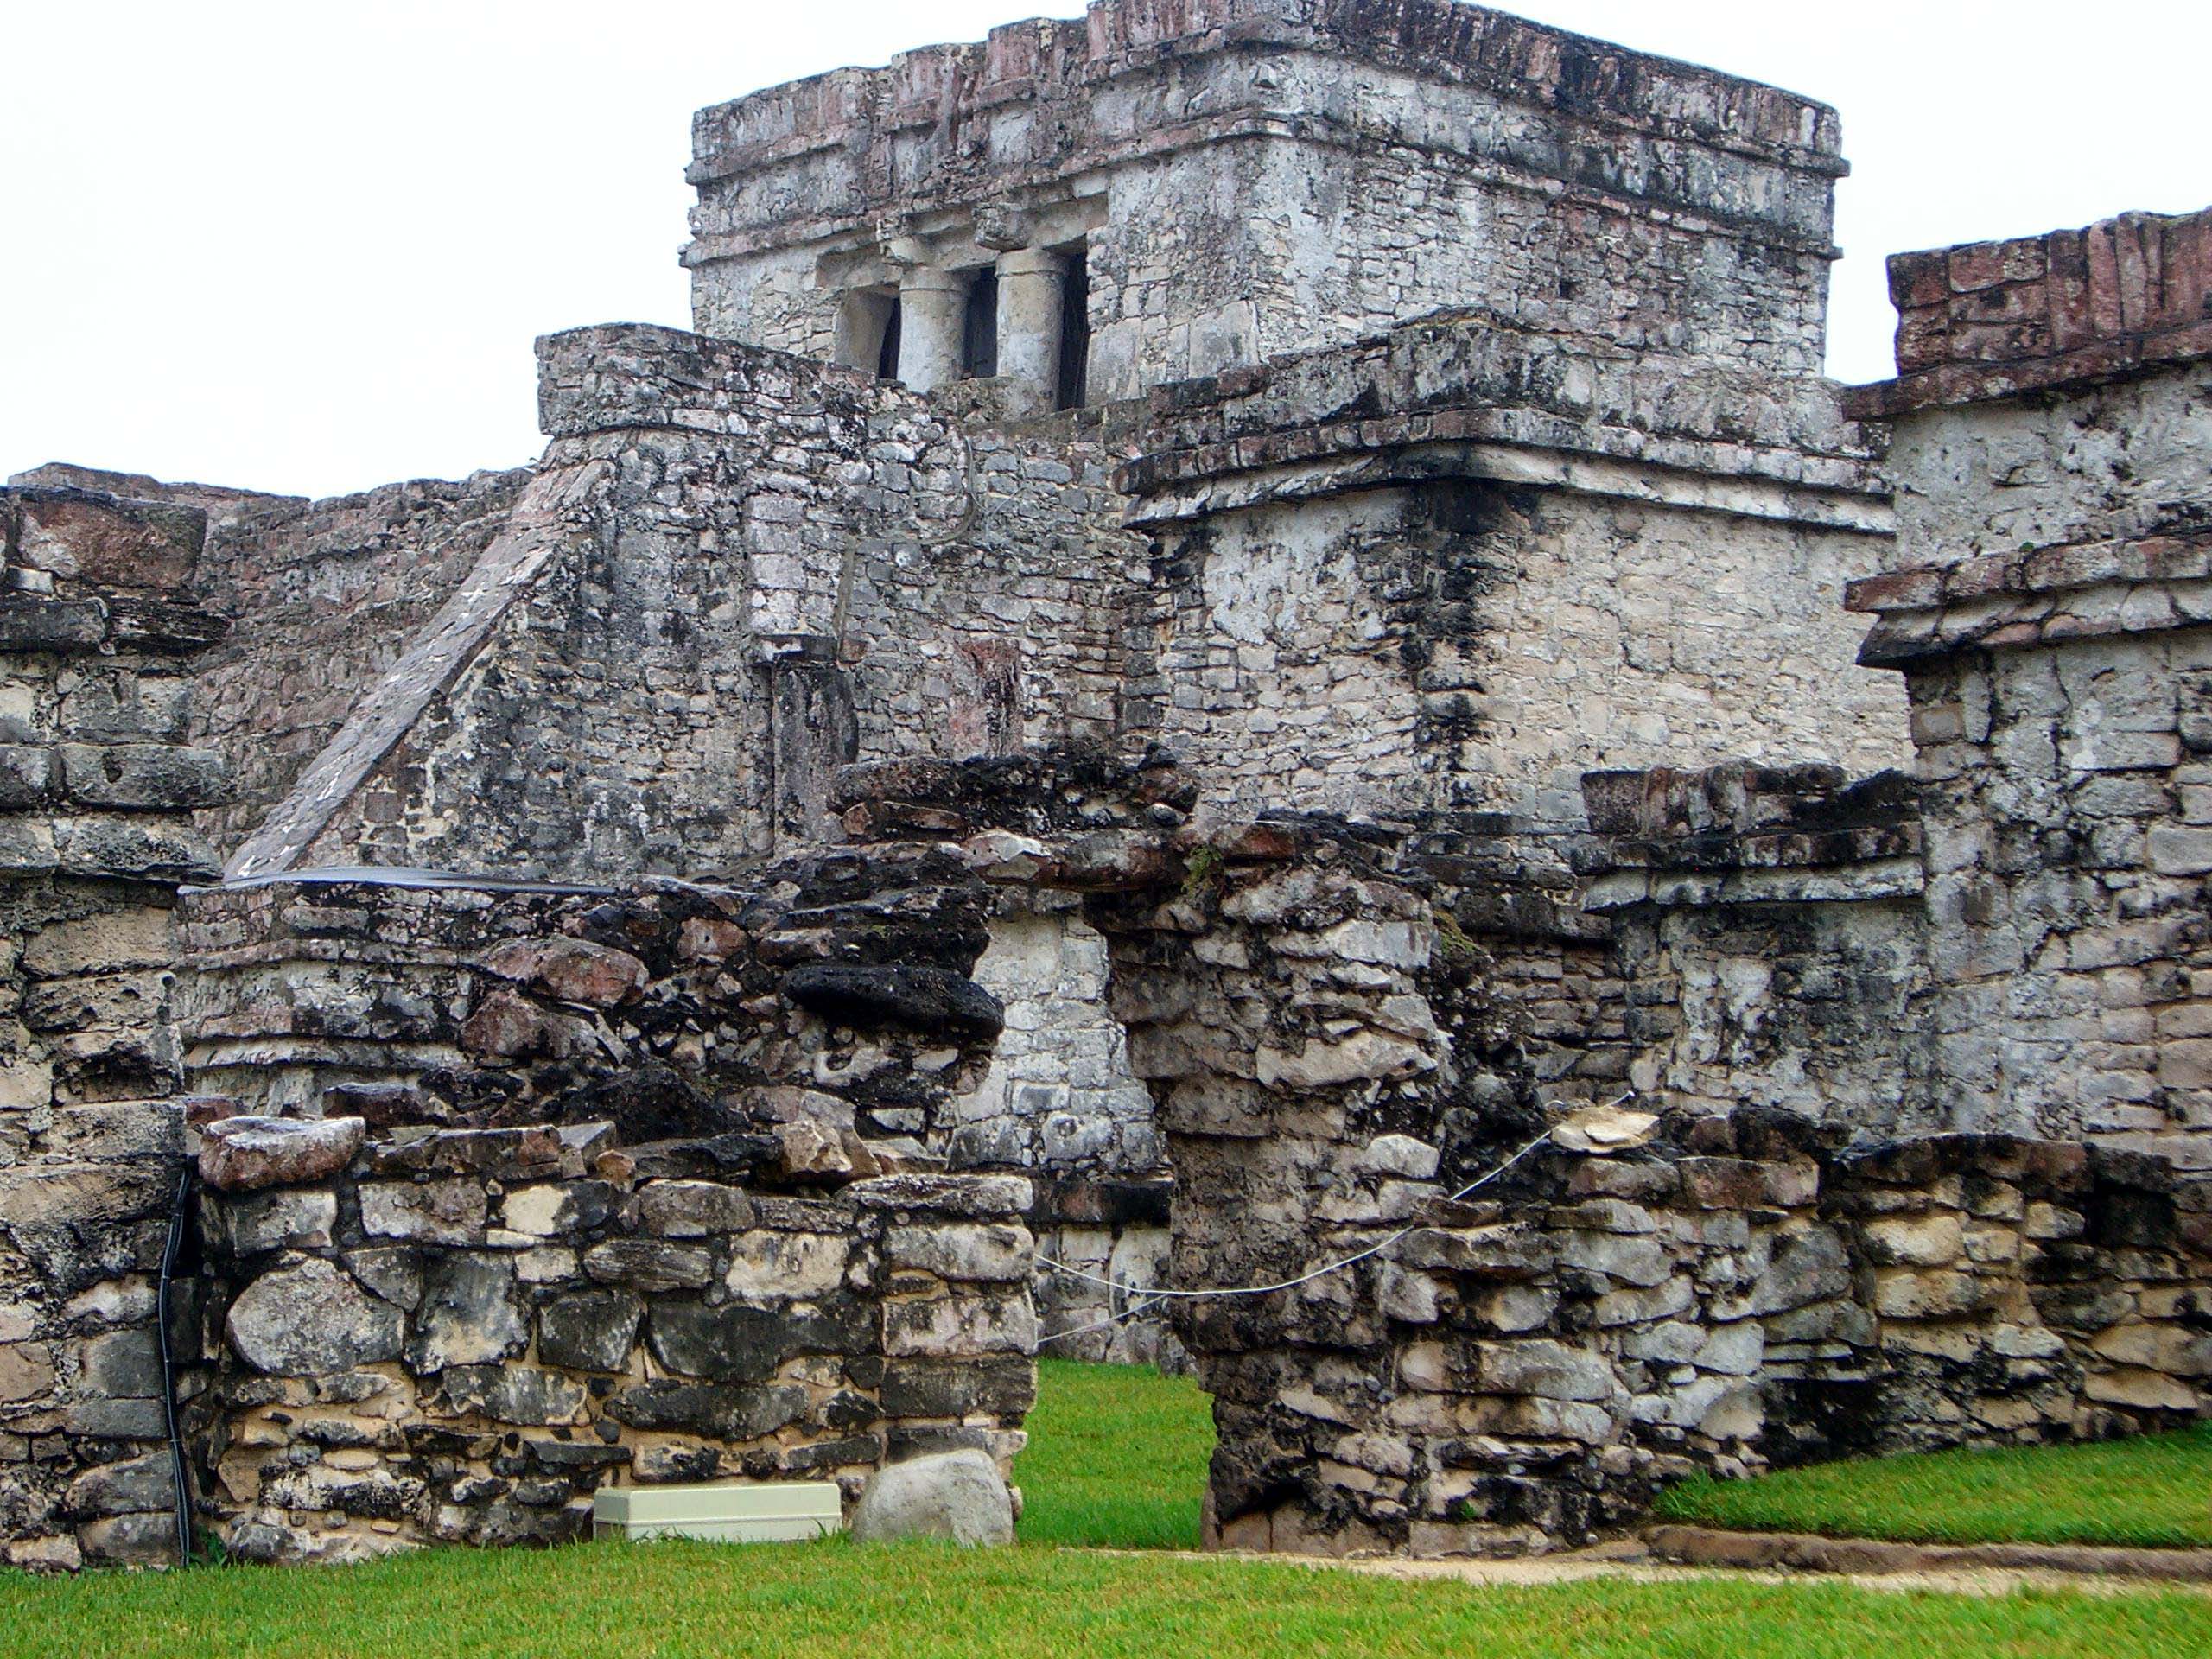 The "Castle" of the Mayan ruins of Tulum